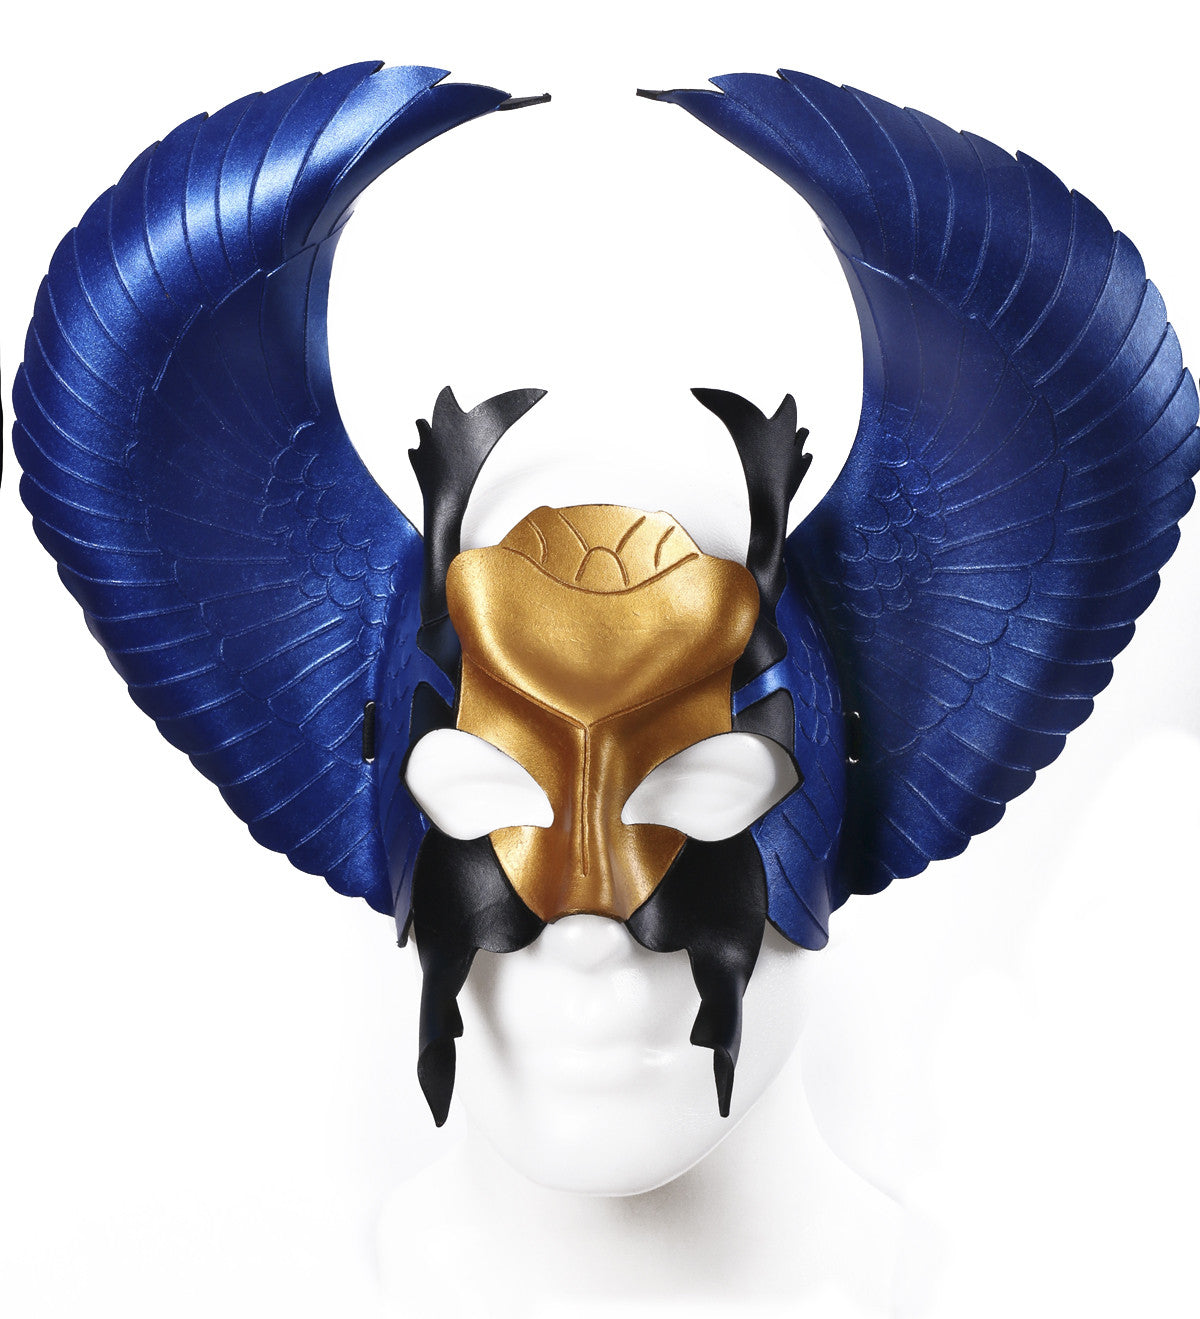 Blue, gold and black Egyptian mask. - Six Wings by Skrocki